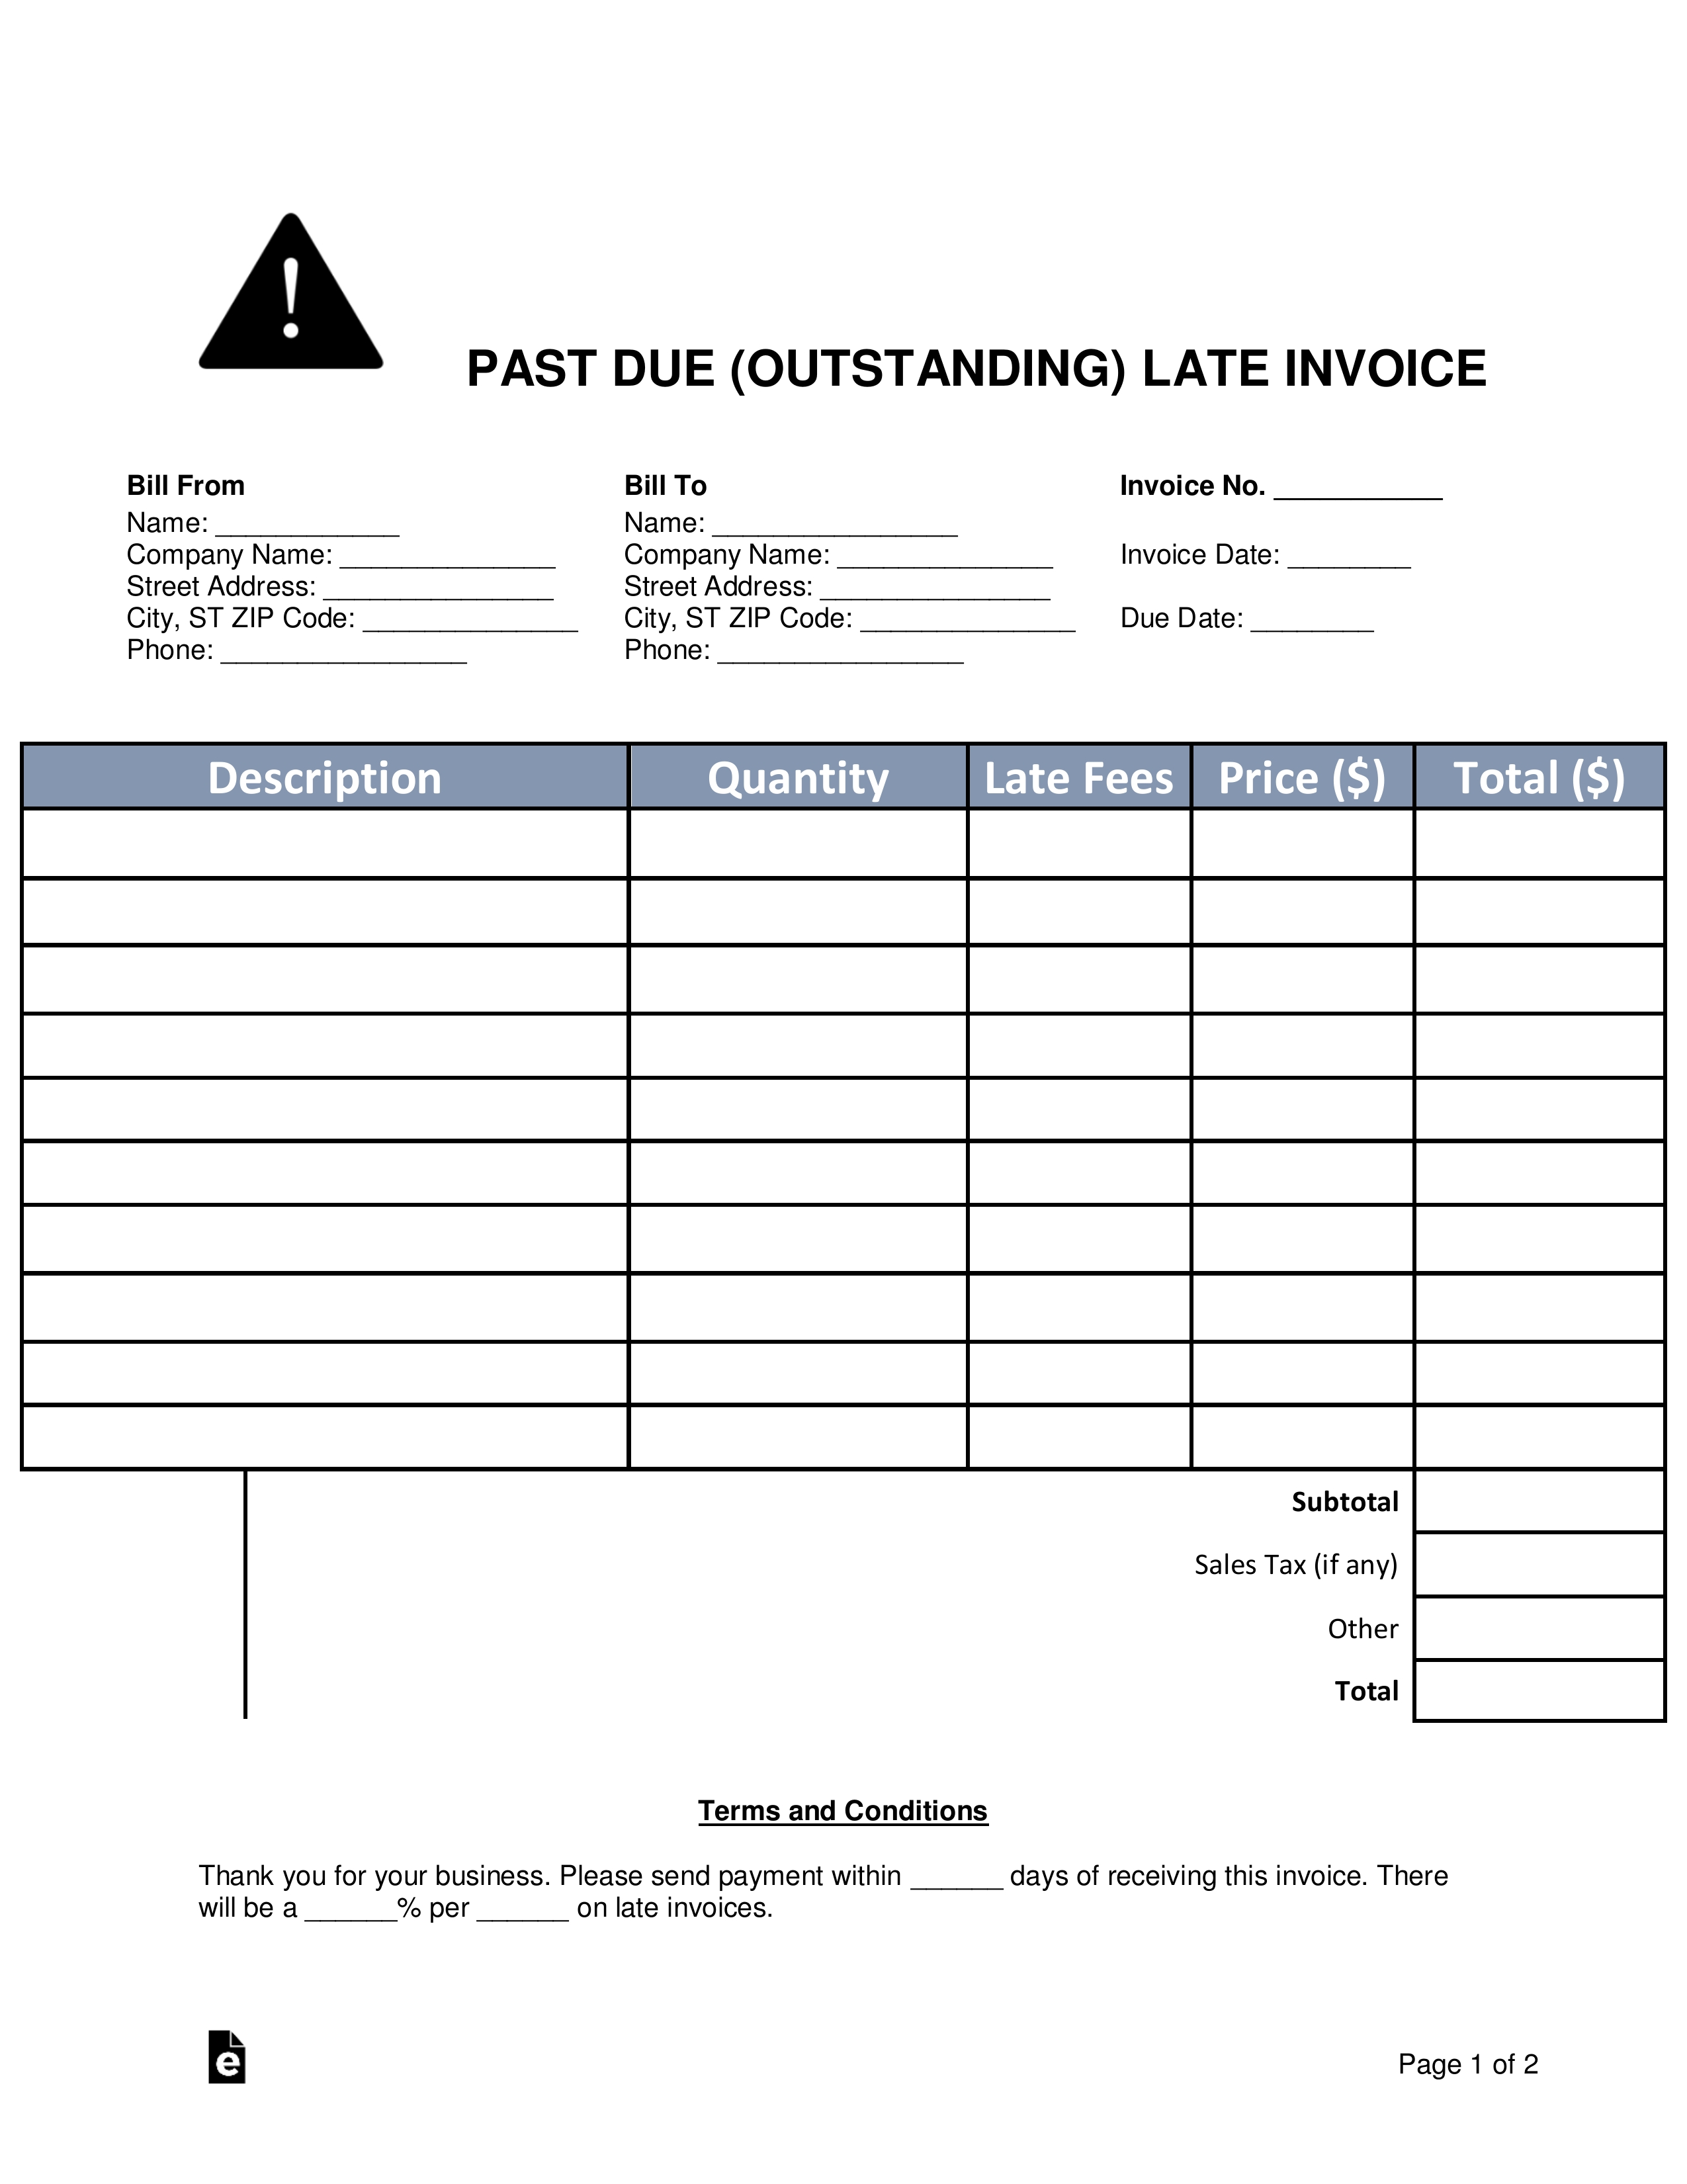 past due invoice template colonarsd7 invoice templates for cleaning business